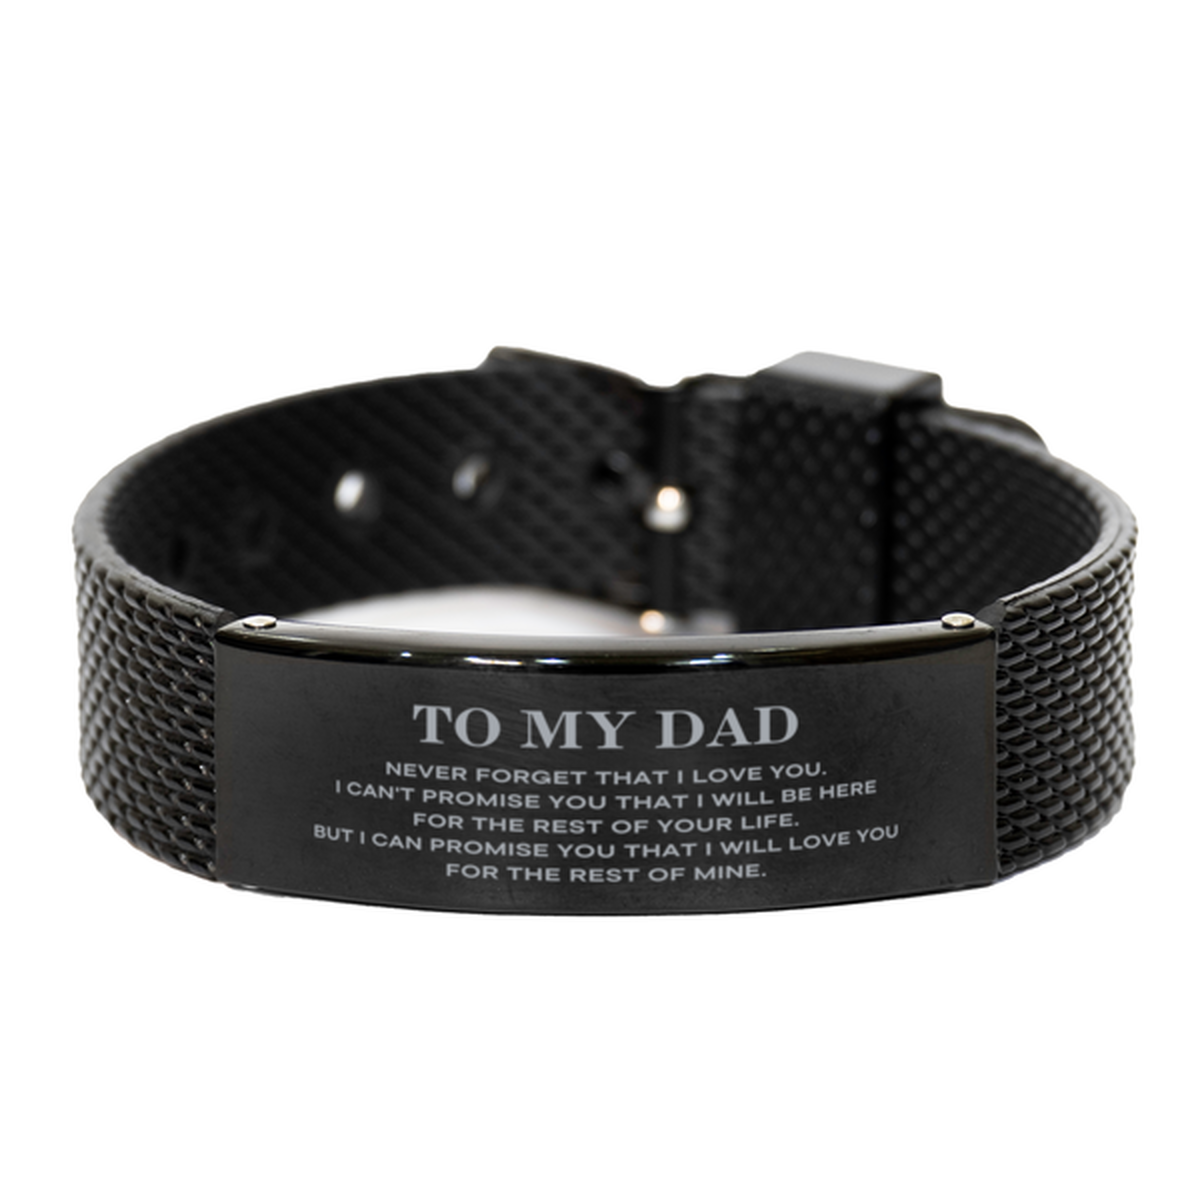 To My Dad Gifts, I will love you for the rest of mine, Love Dad Bracelet, Birthday Christmas Unique Black Shark Mesh Bracelet For Dad